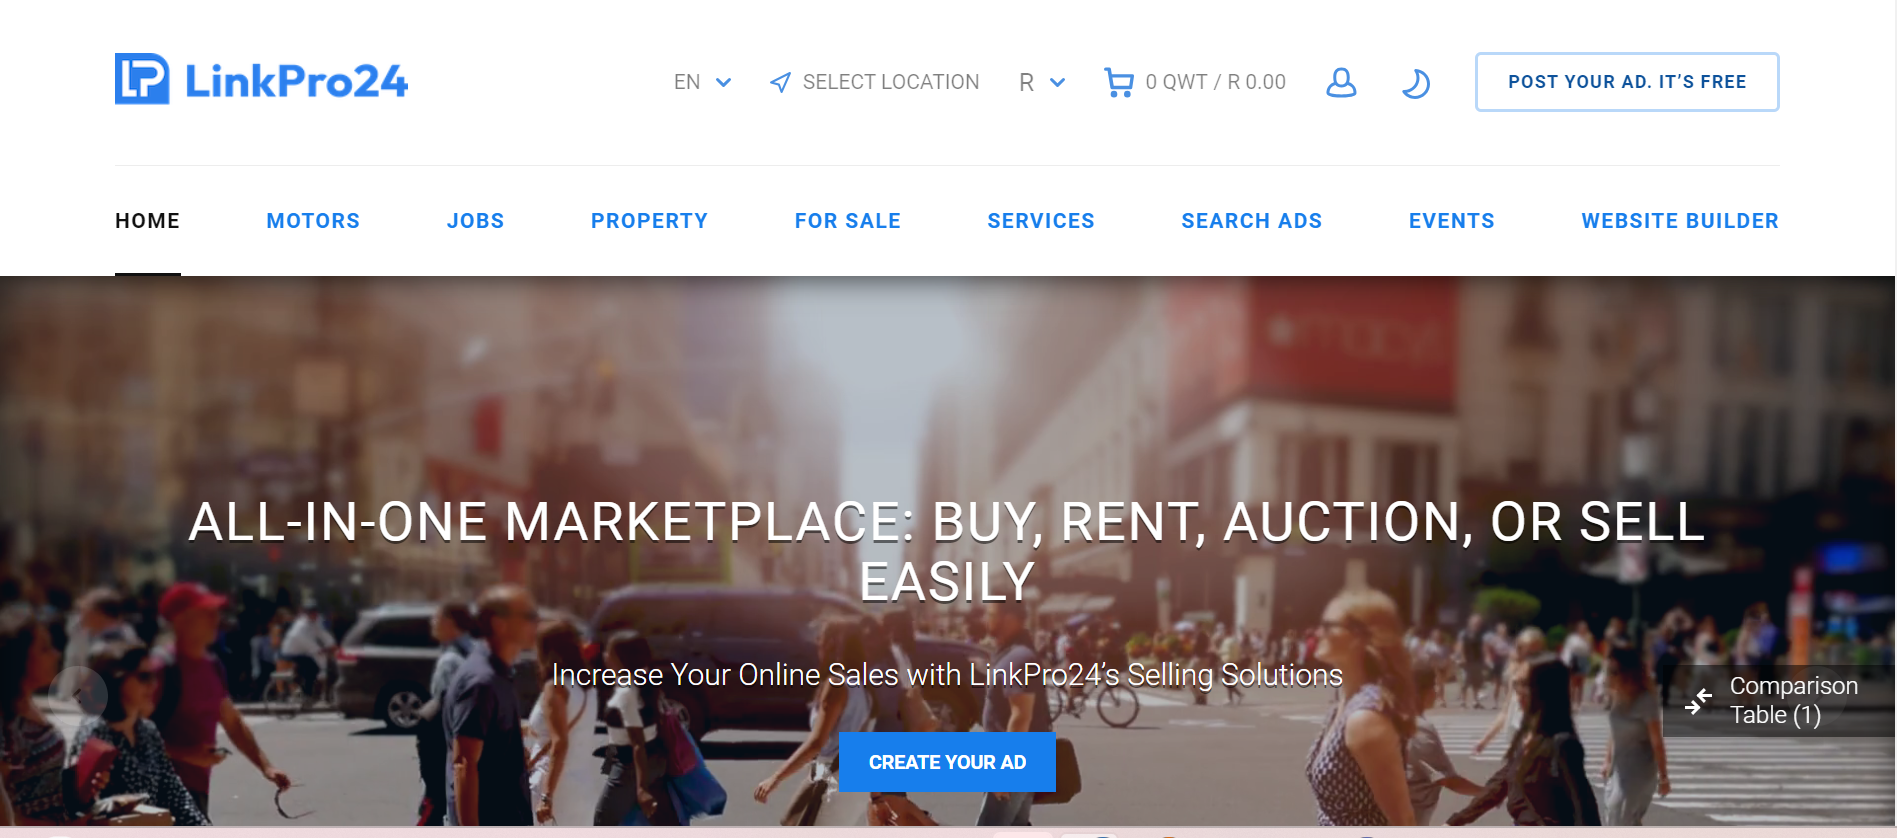 LinkPro24 Marketplace and Free Classified Ads